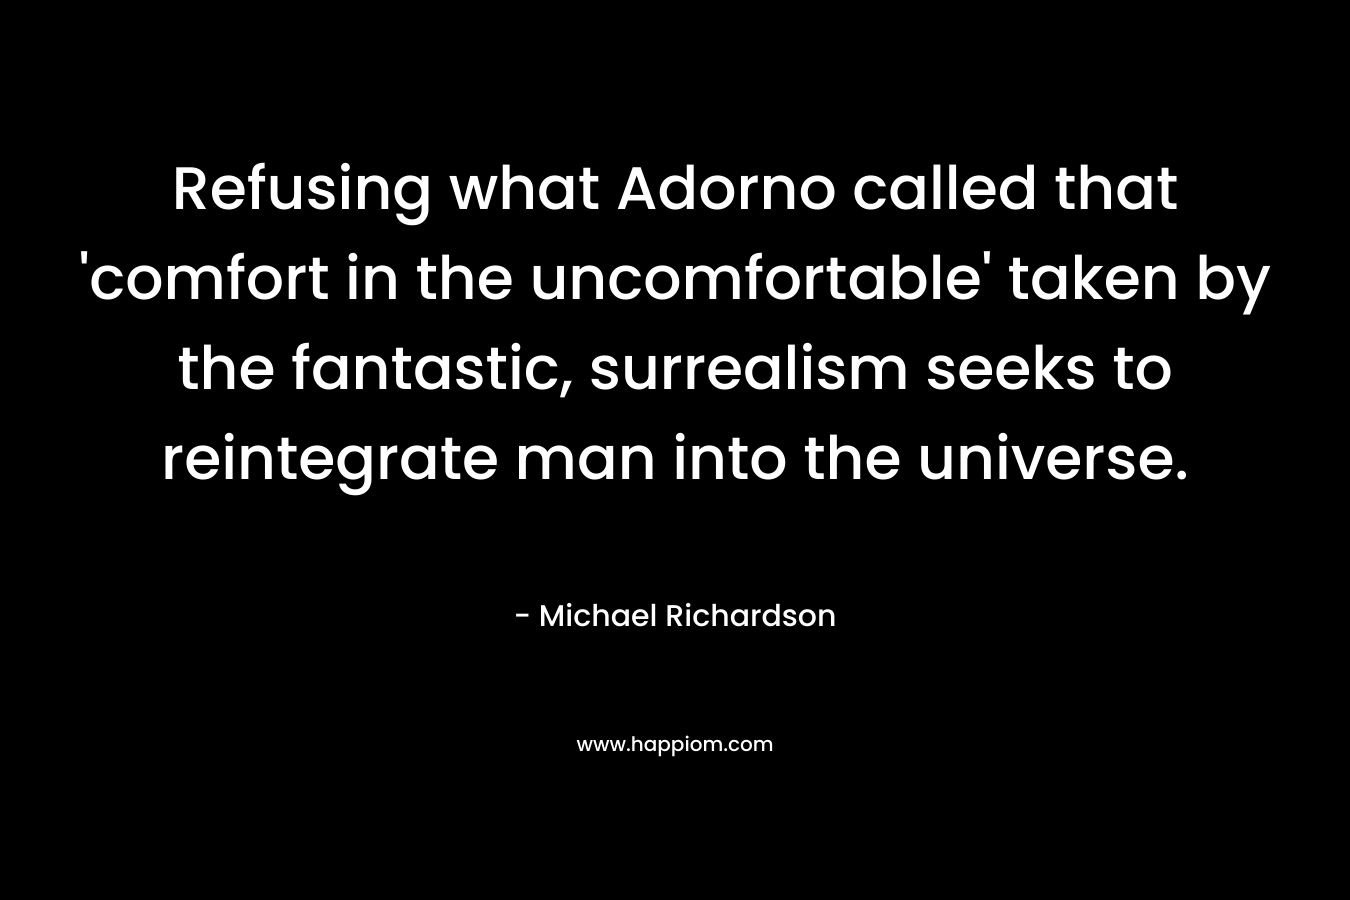 Refusing what Adorno called that ‘comfort in the uncomfortable’ taken by the fantastic, surrealism seeks to reintegrate man into the universe. – Michael Richardson